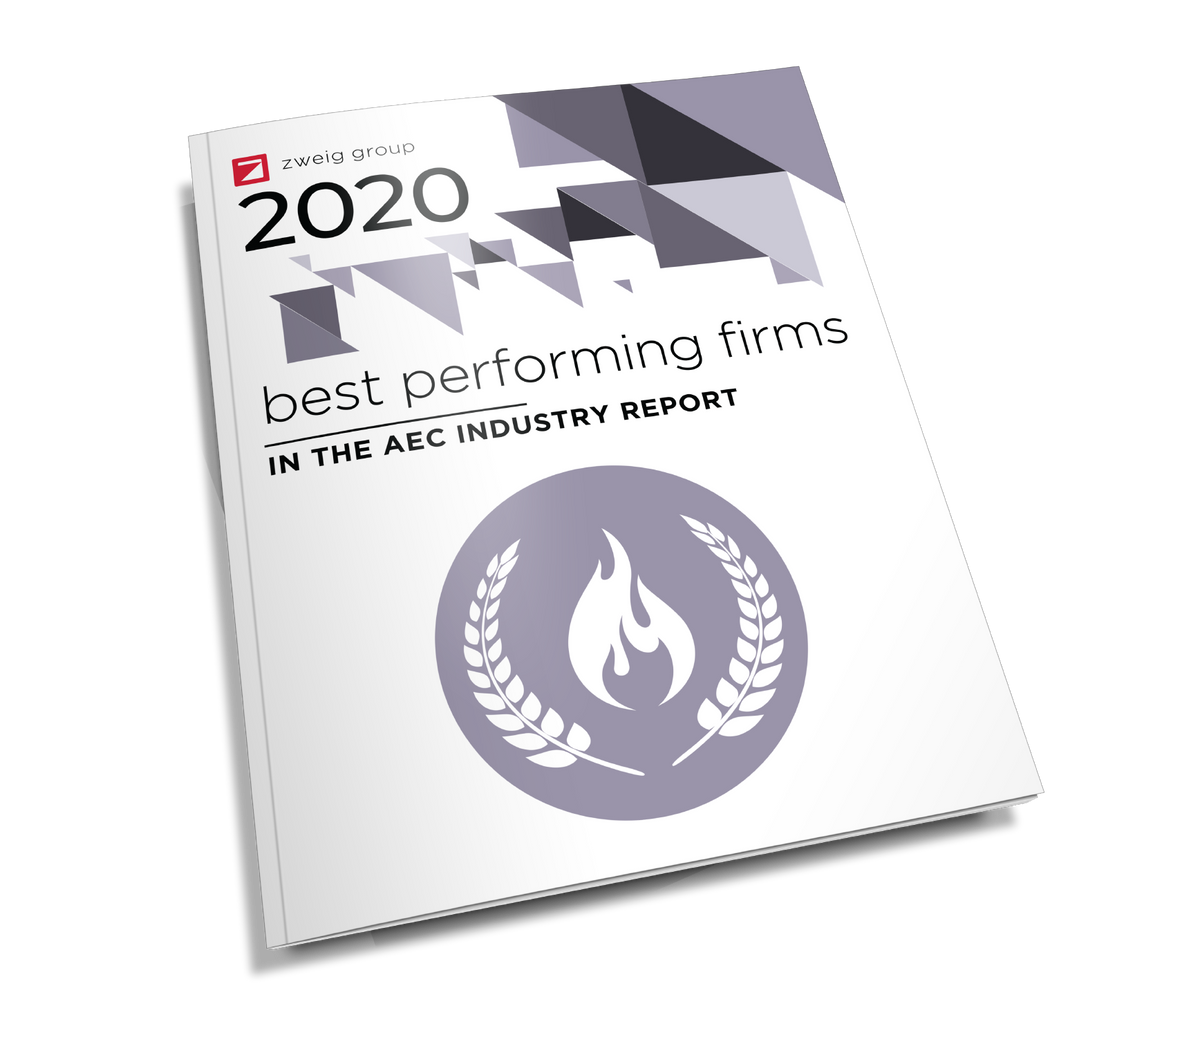 2020 Best Performing Firms in the AEC Industry Report Cover